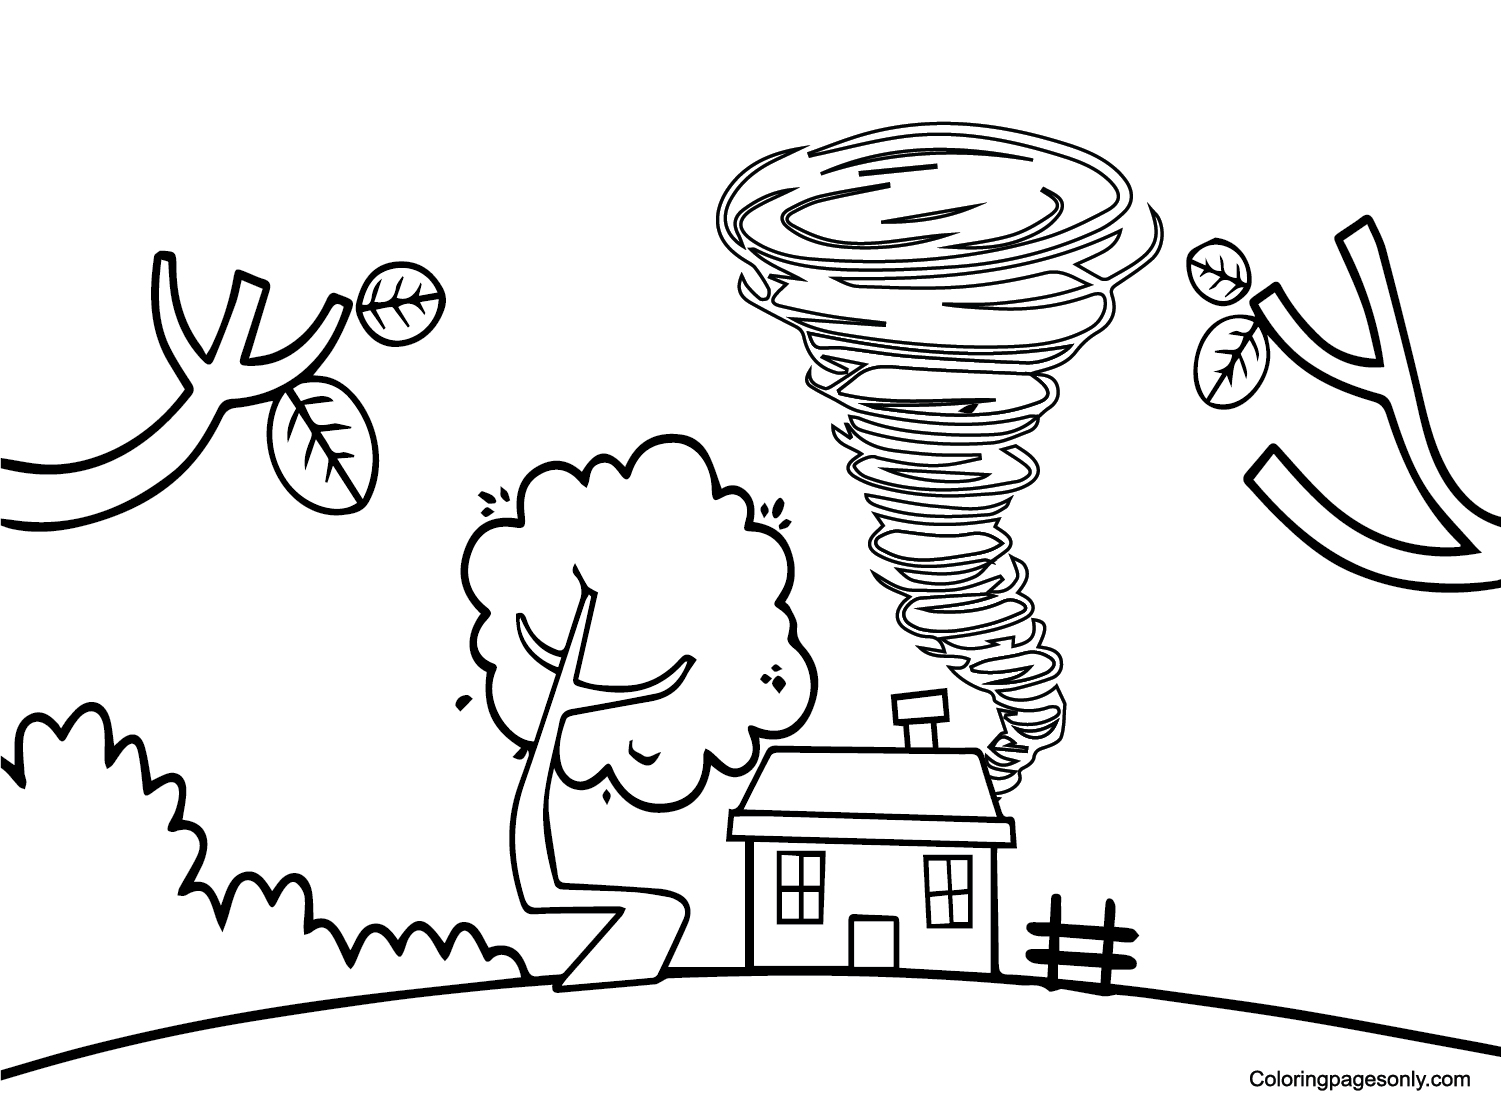 Free Tornado Coloring Pages - Tornado Coloring Pages - Coloring Pages For  Kids And Adults